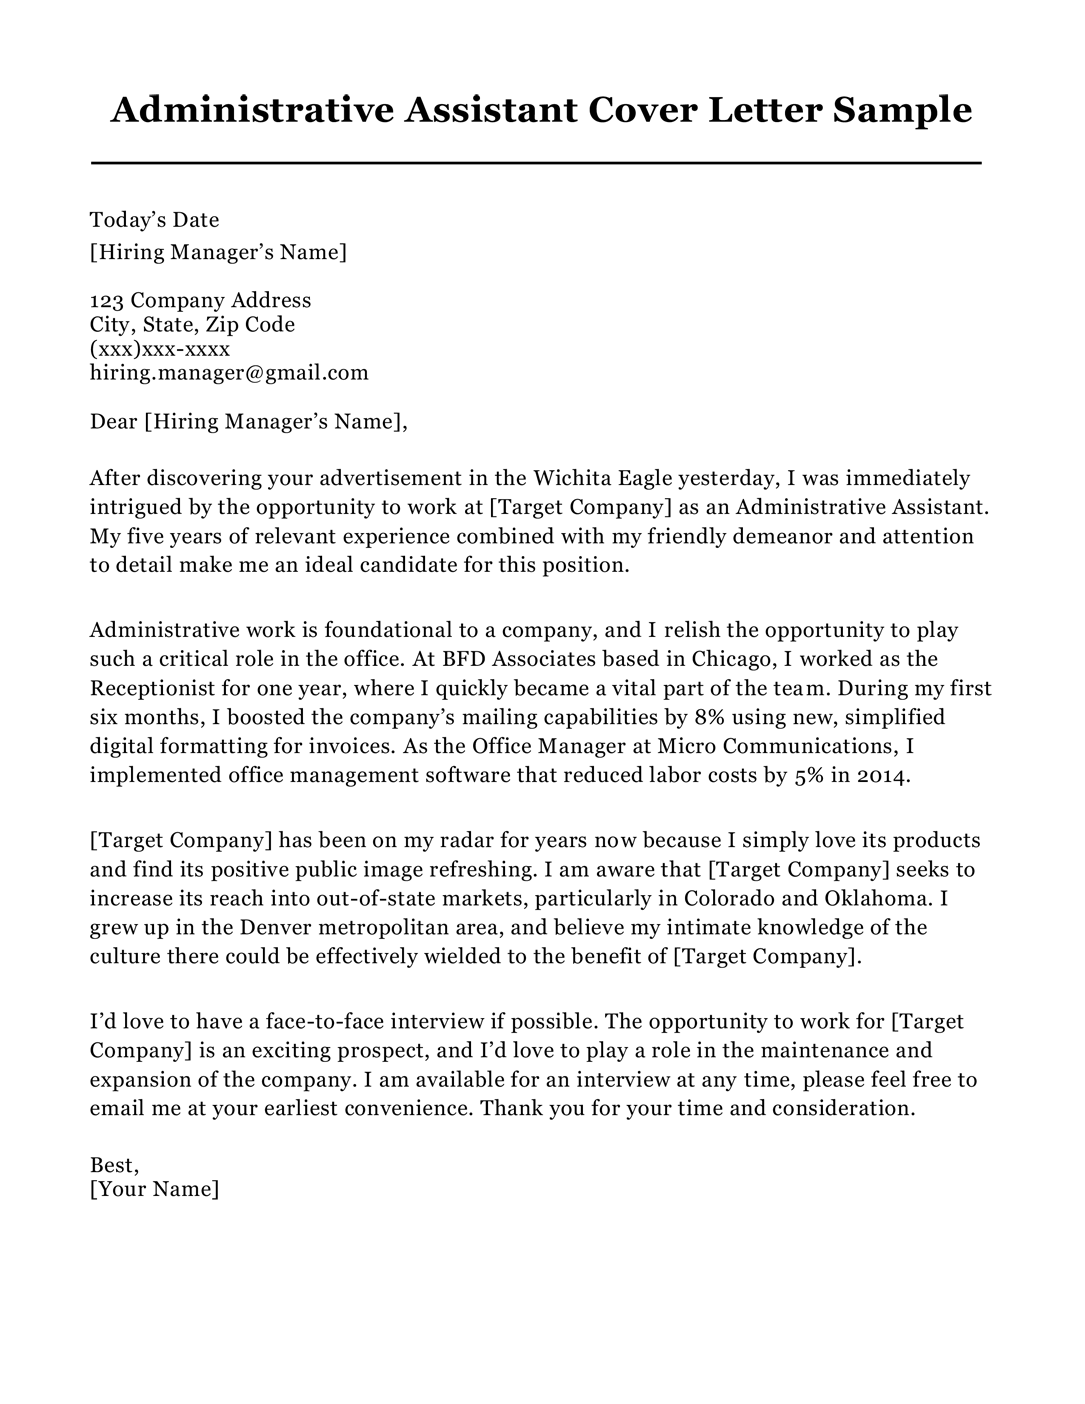 Cover Letter Example For Administrative Assistant Position from resumecompanion.com